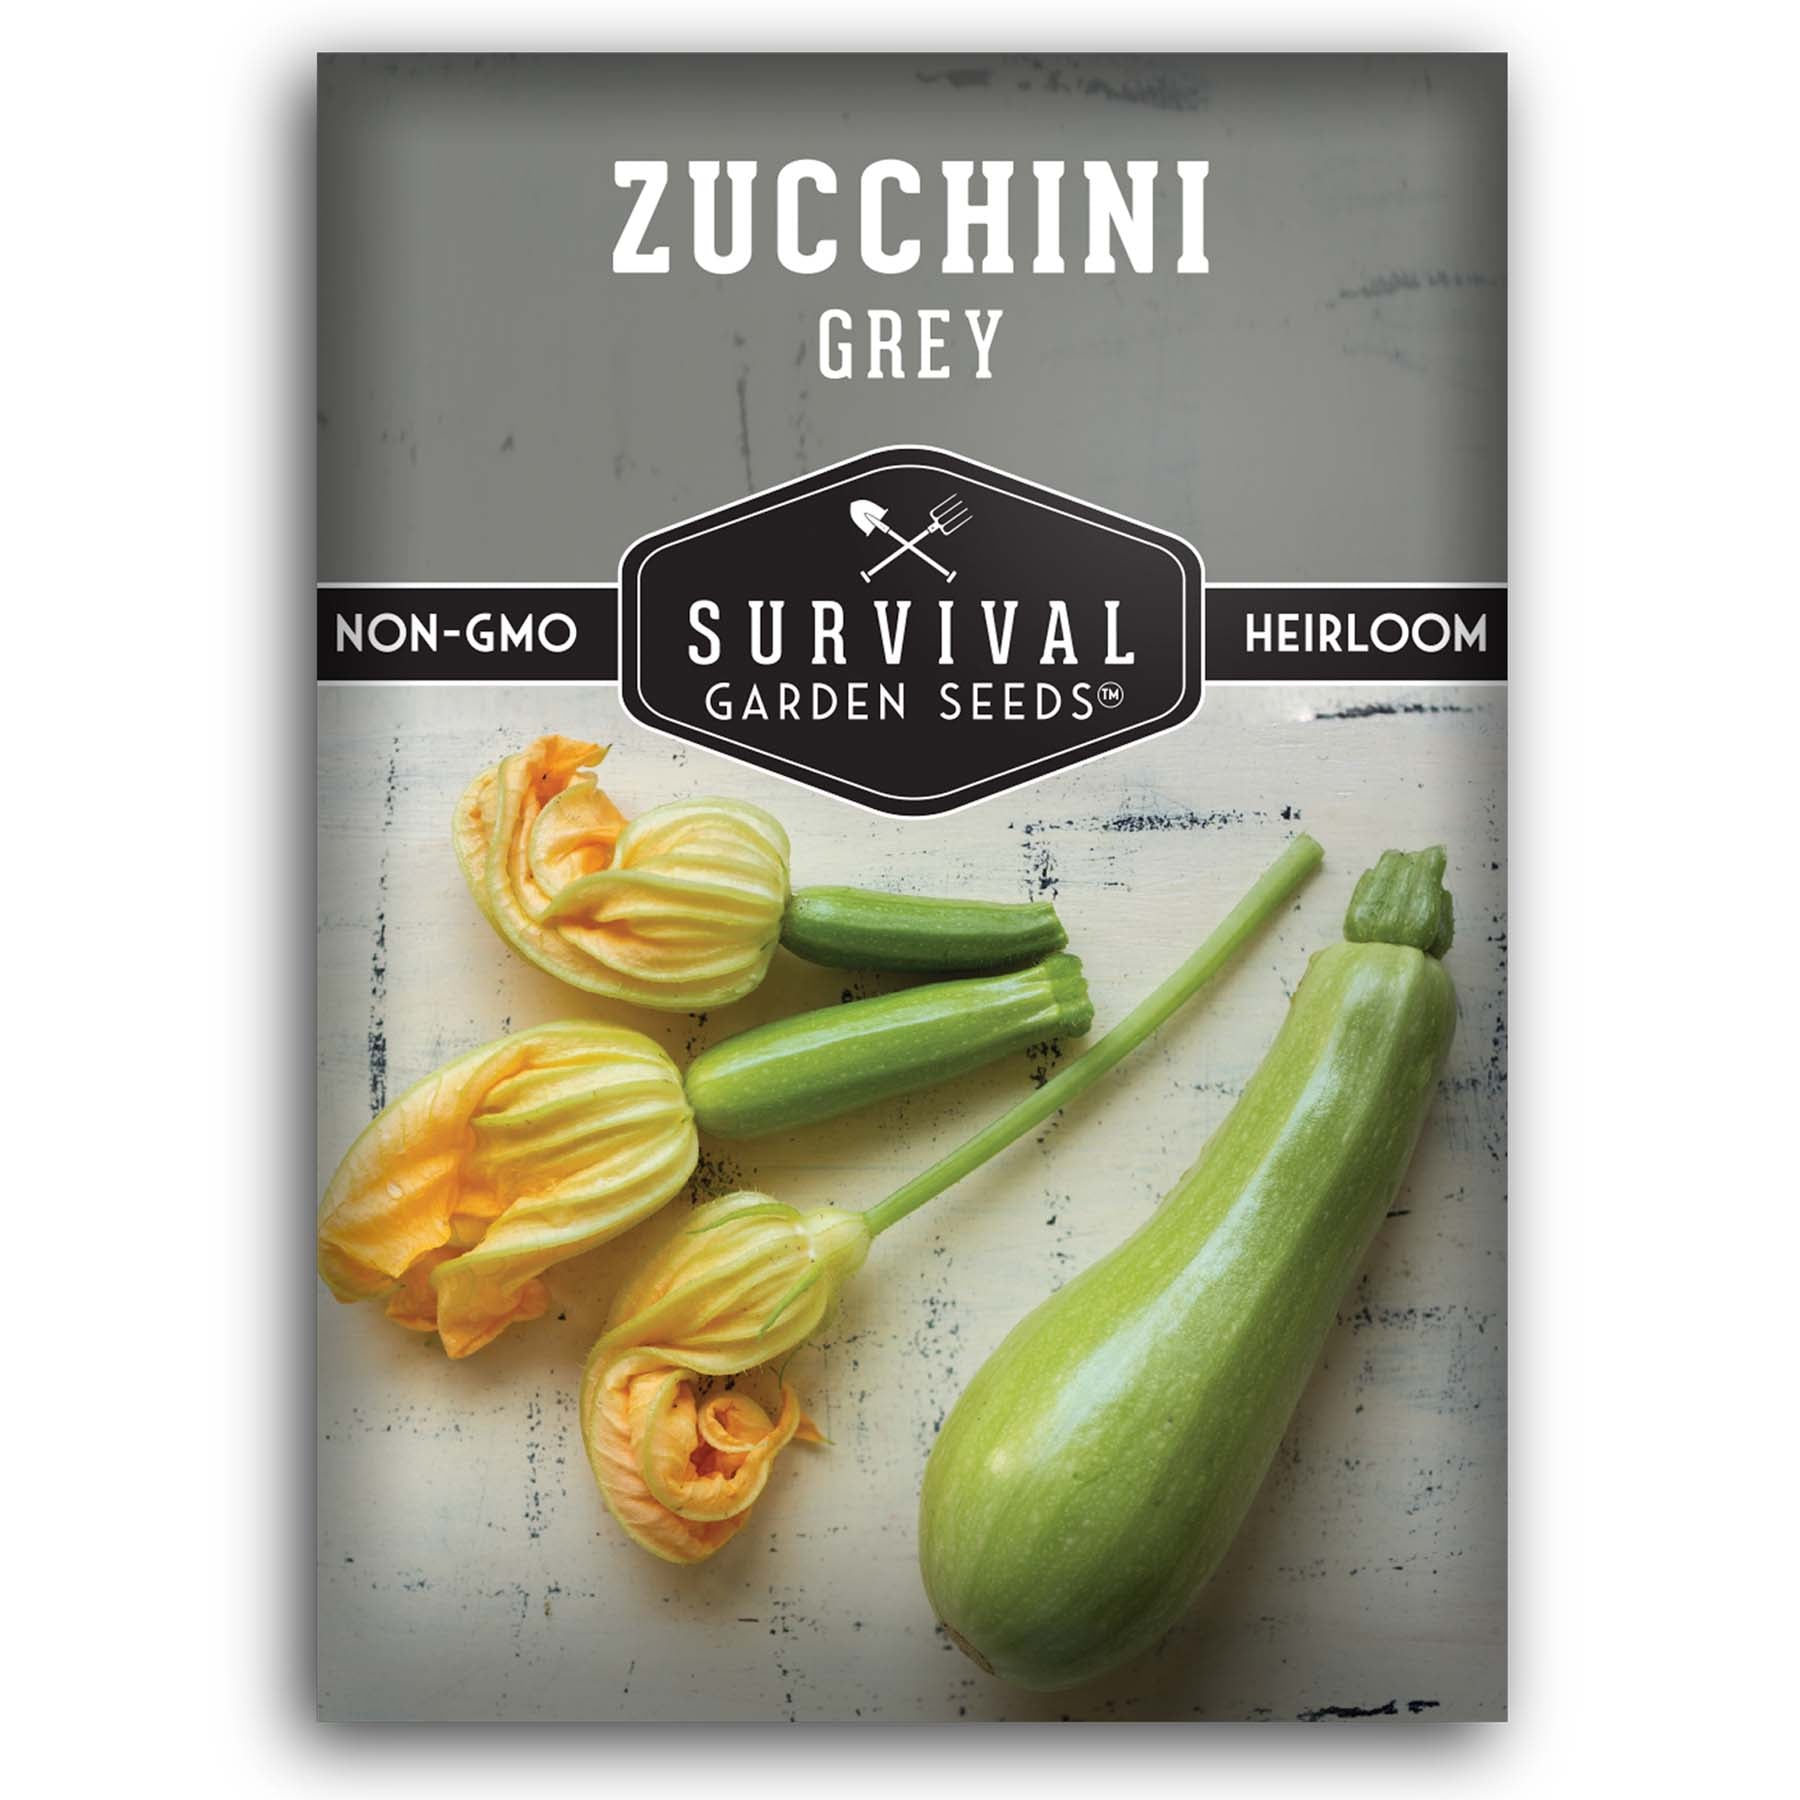 Grey Zucchini Seeds for planting